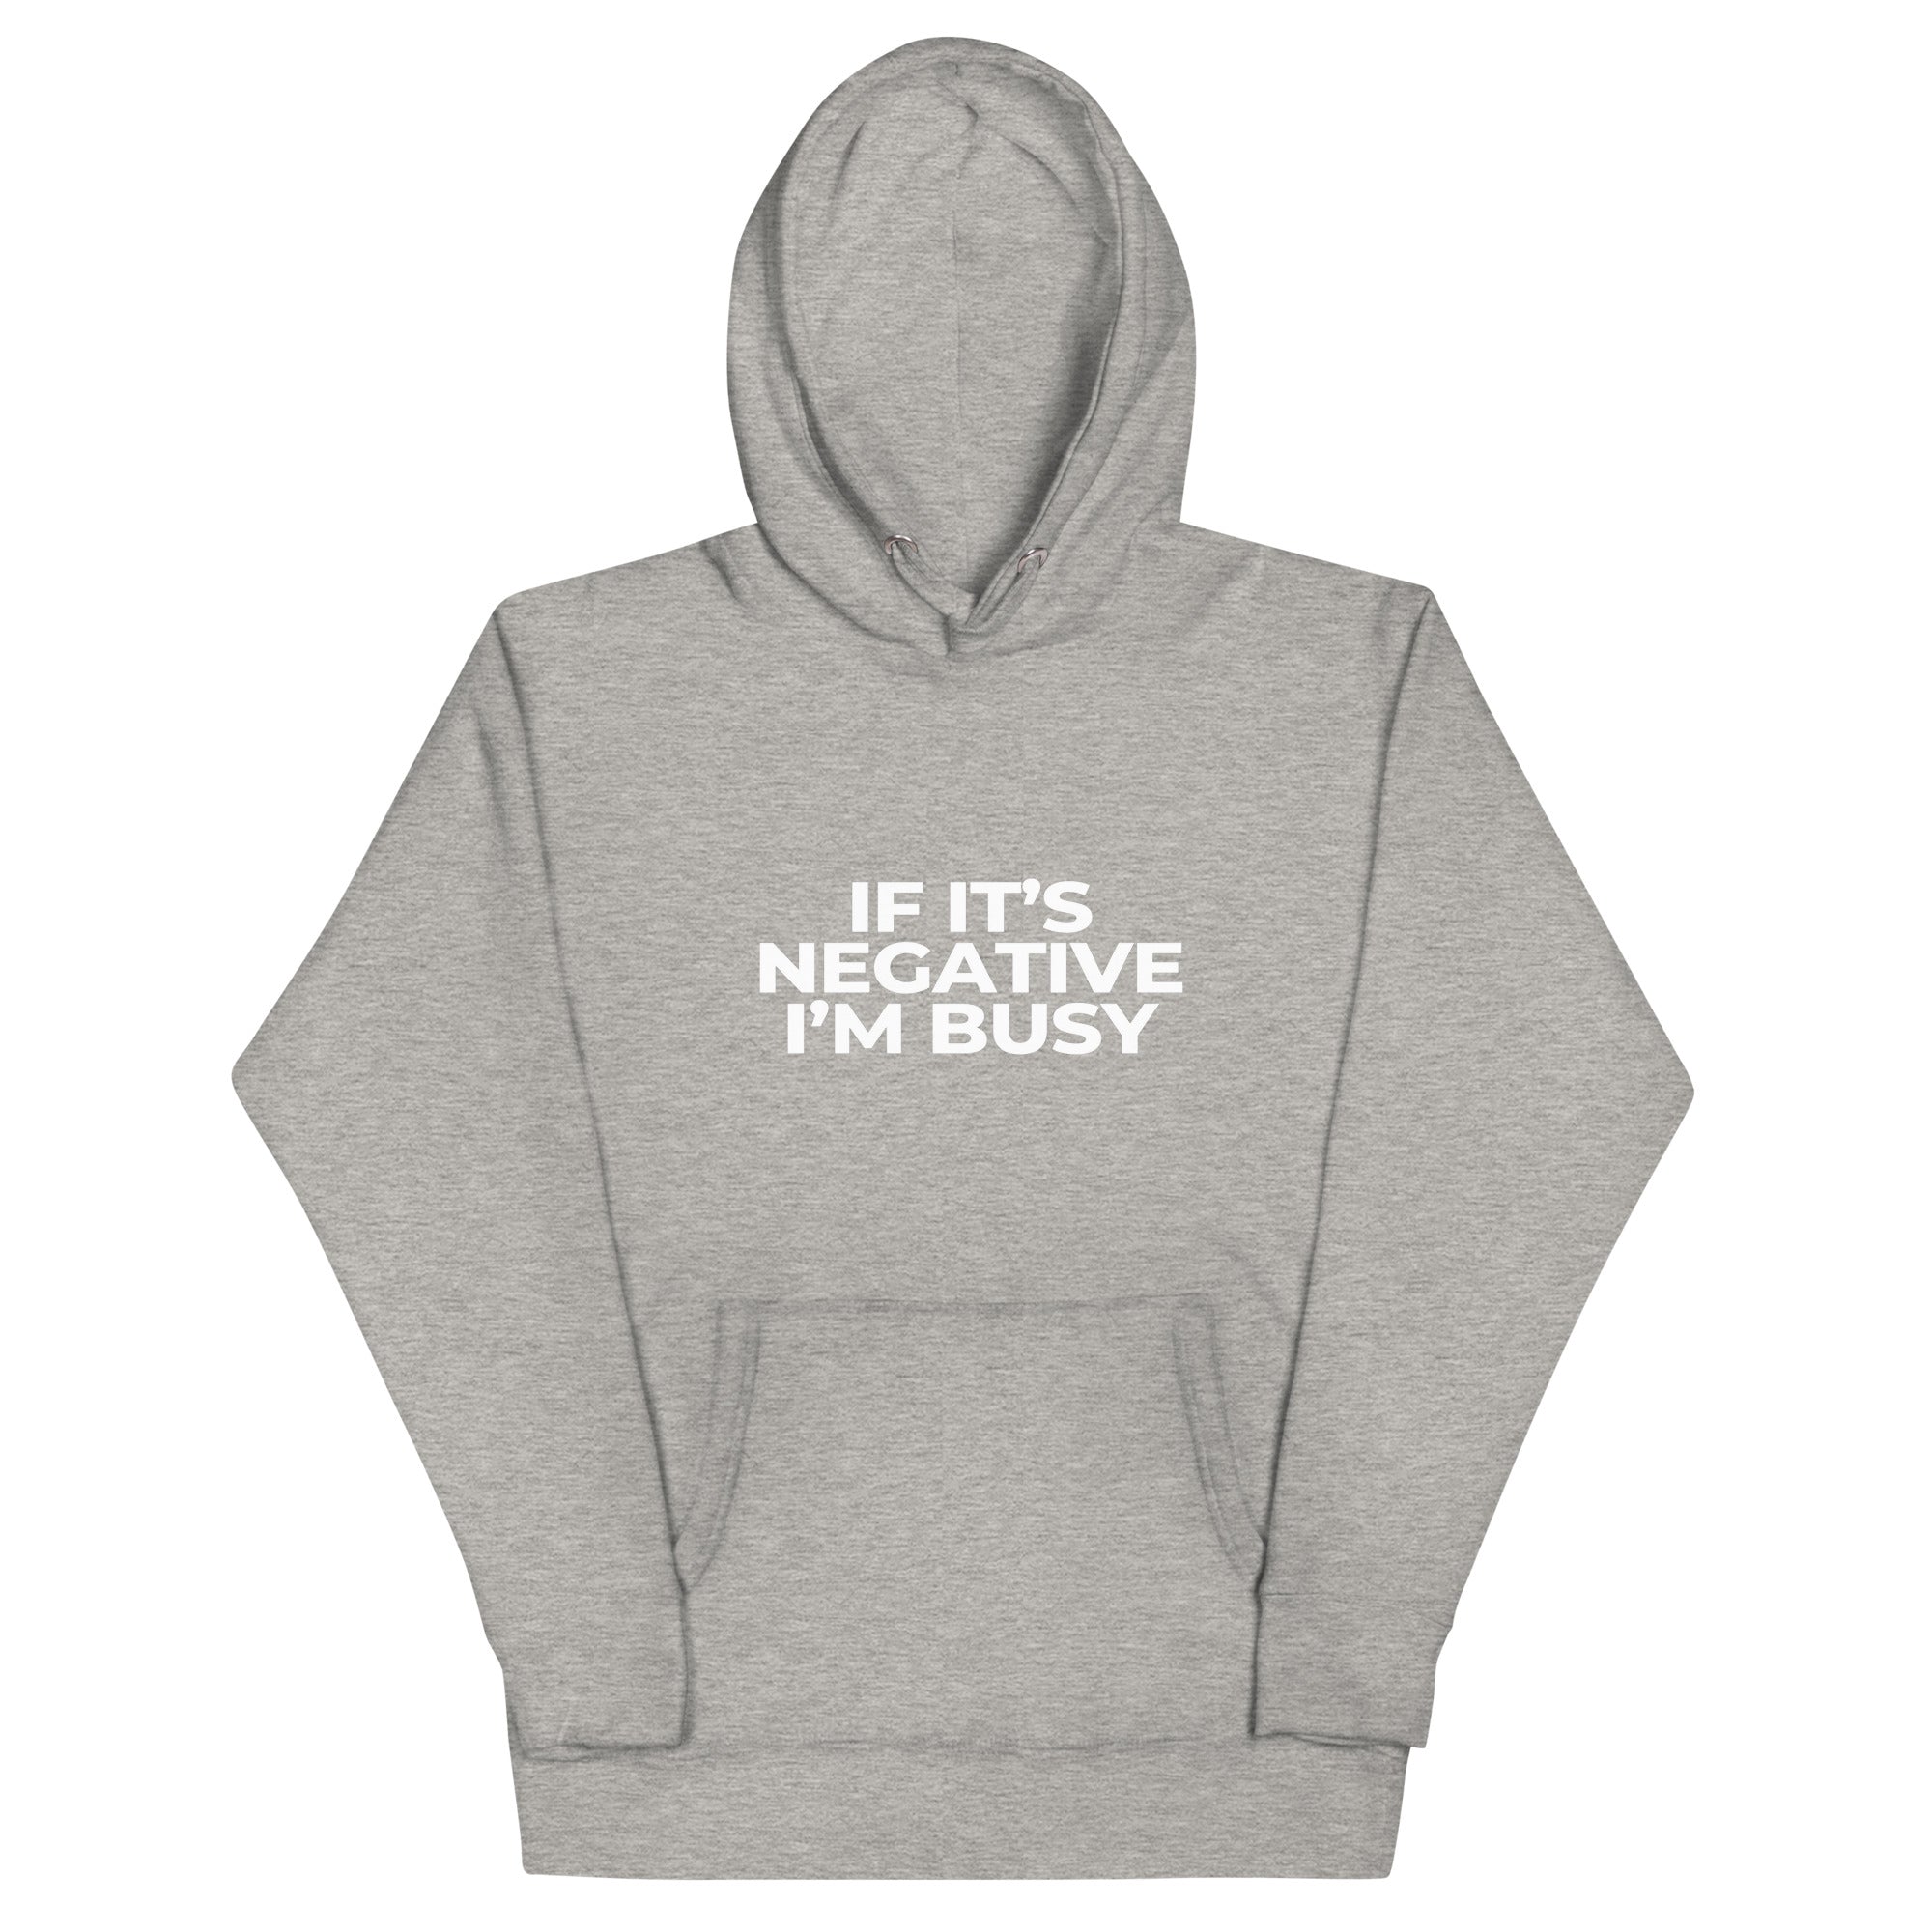 Adult Unisex "If It's Negative, I'm Busy" Hoodie